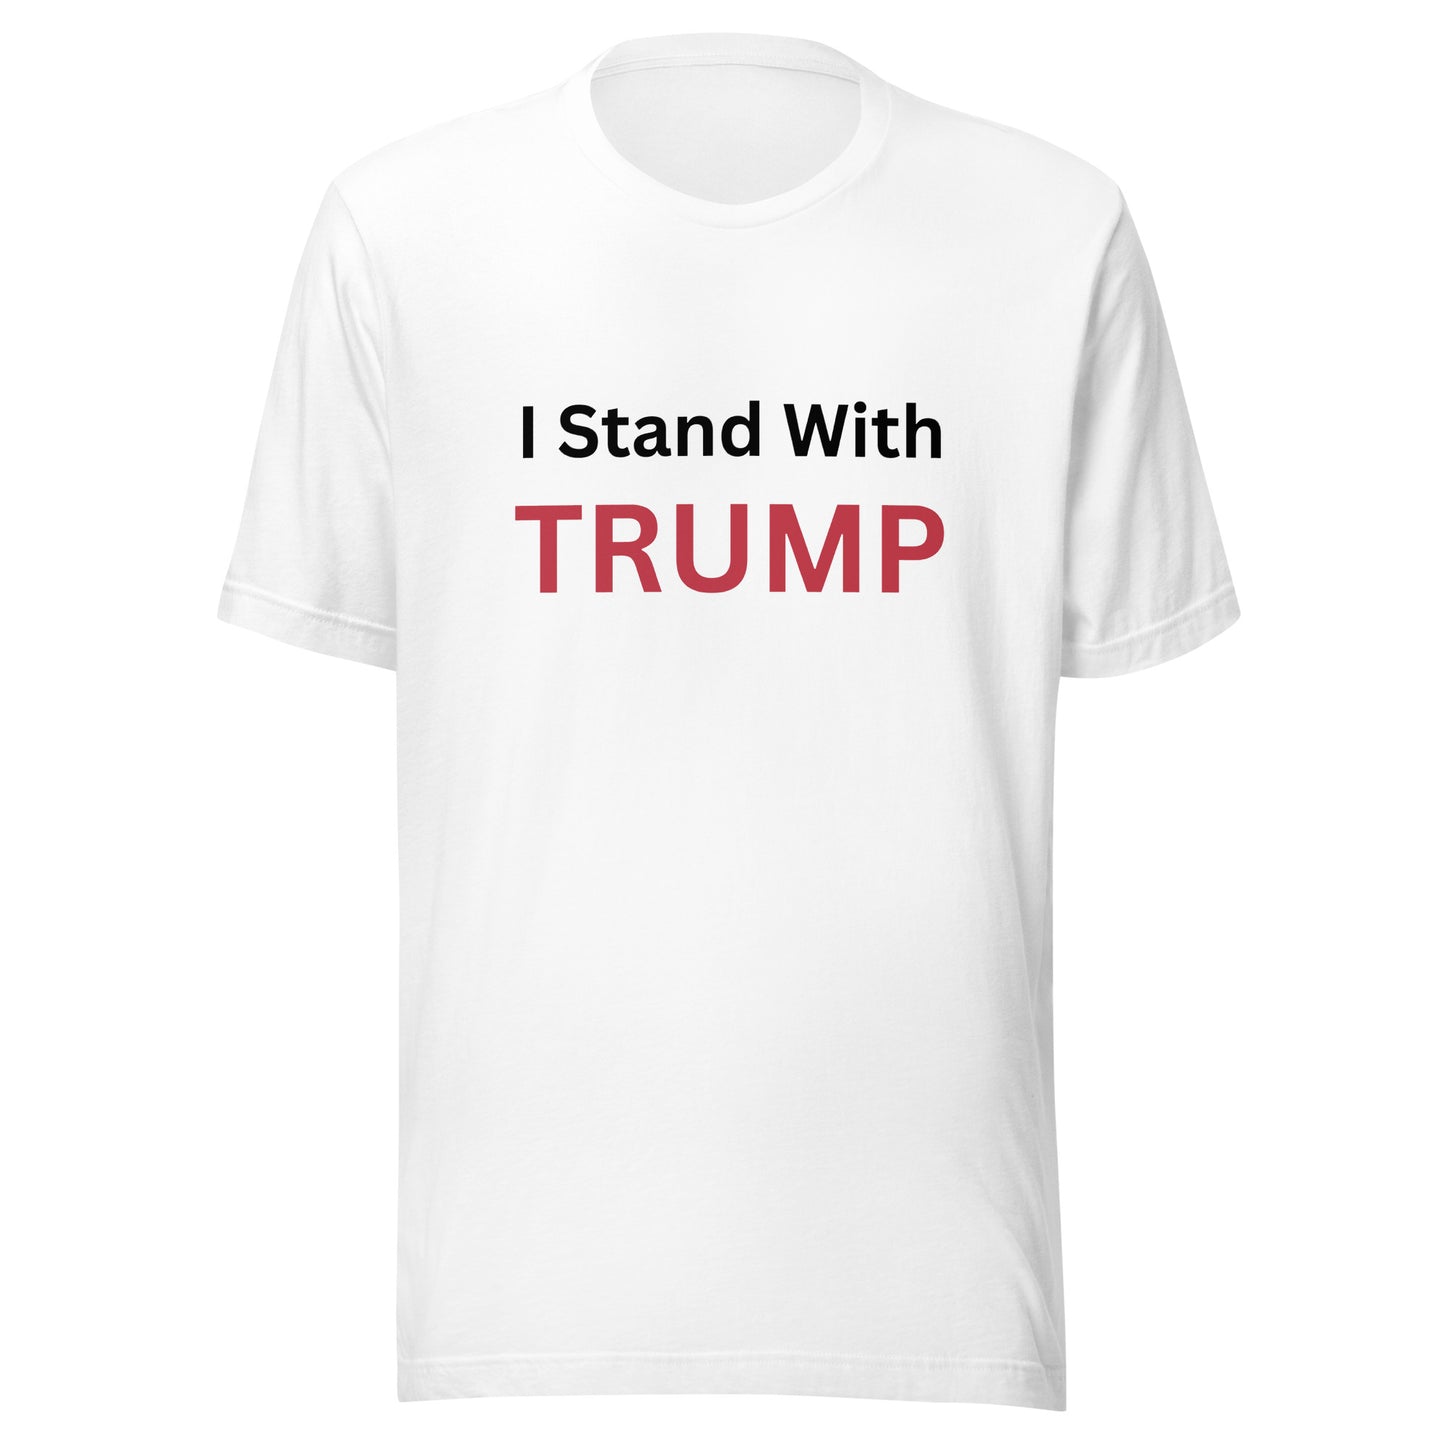 I Stand With TRUMP T-Shirt